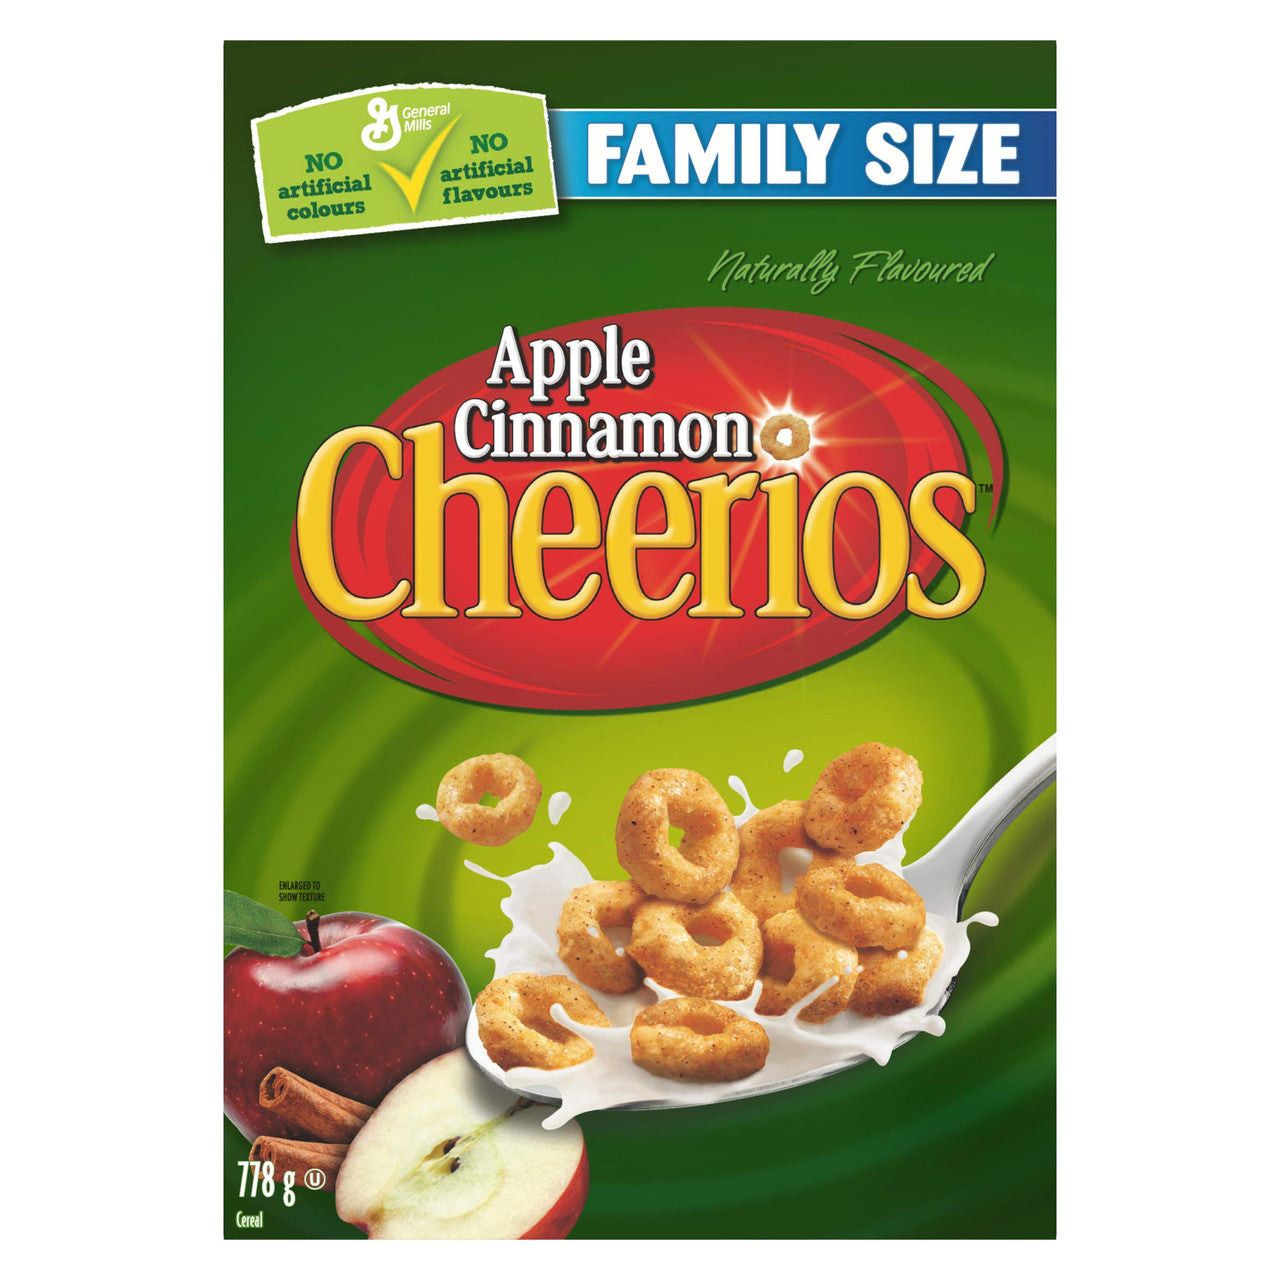 Cheerios Apple Cinnamon Naturally Flavoured Cereal Family Size, 778g/27.4oz, (Imported from Canada)